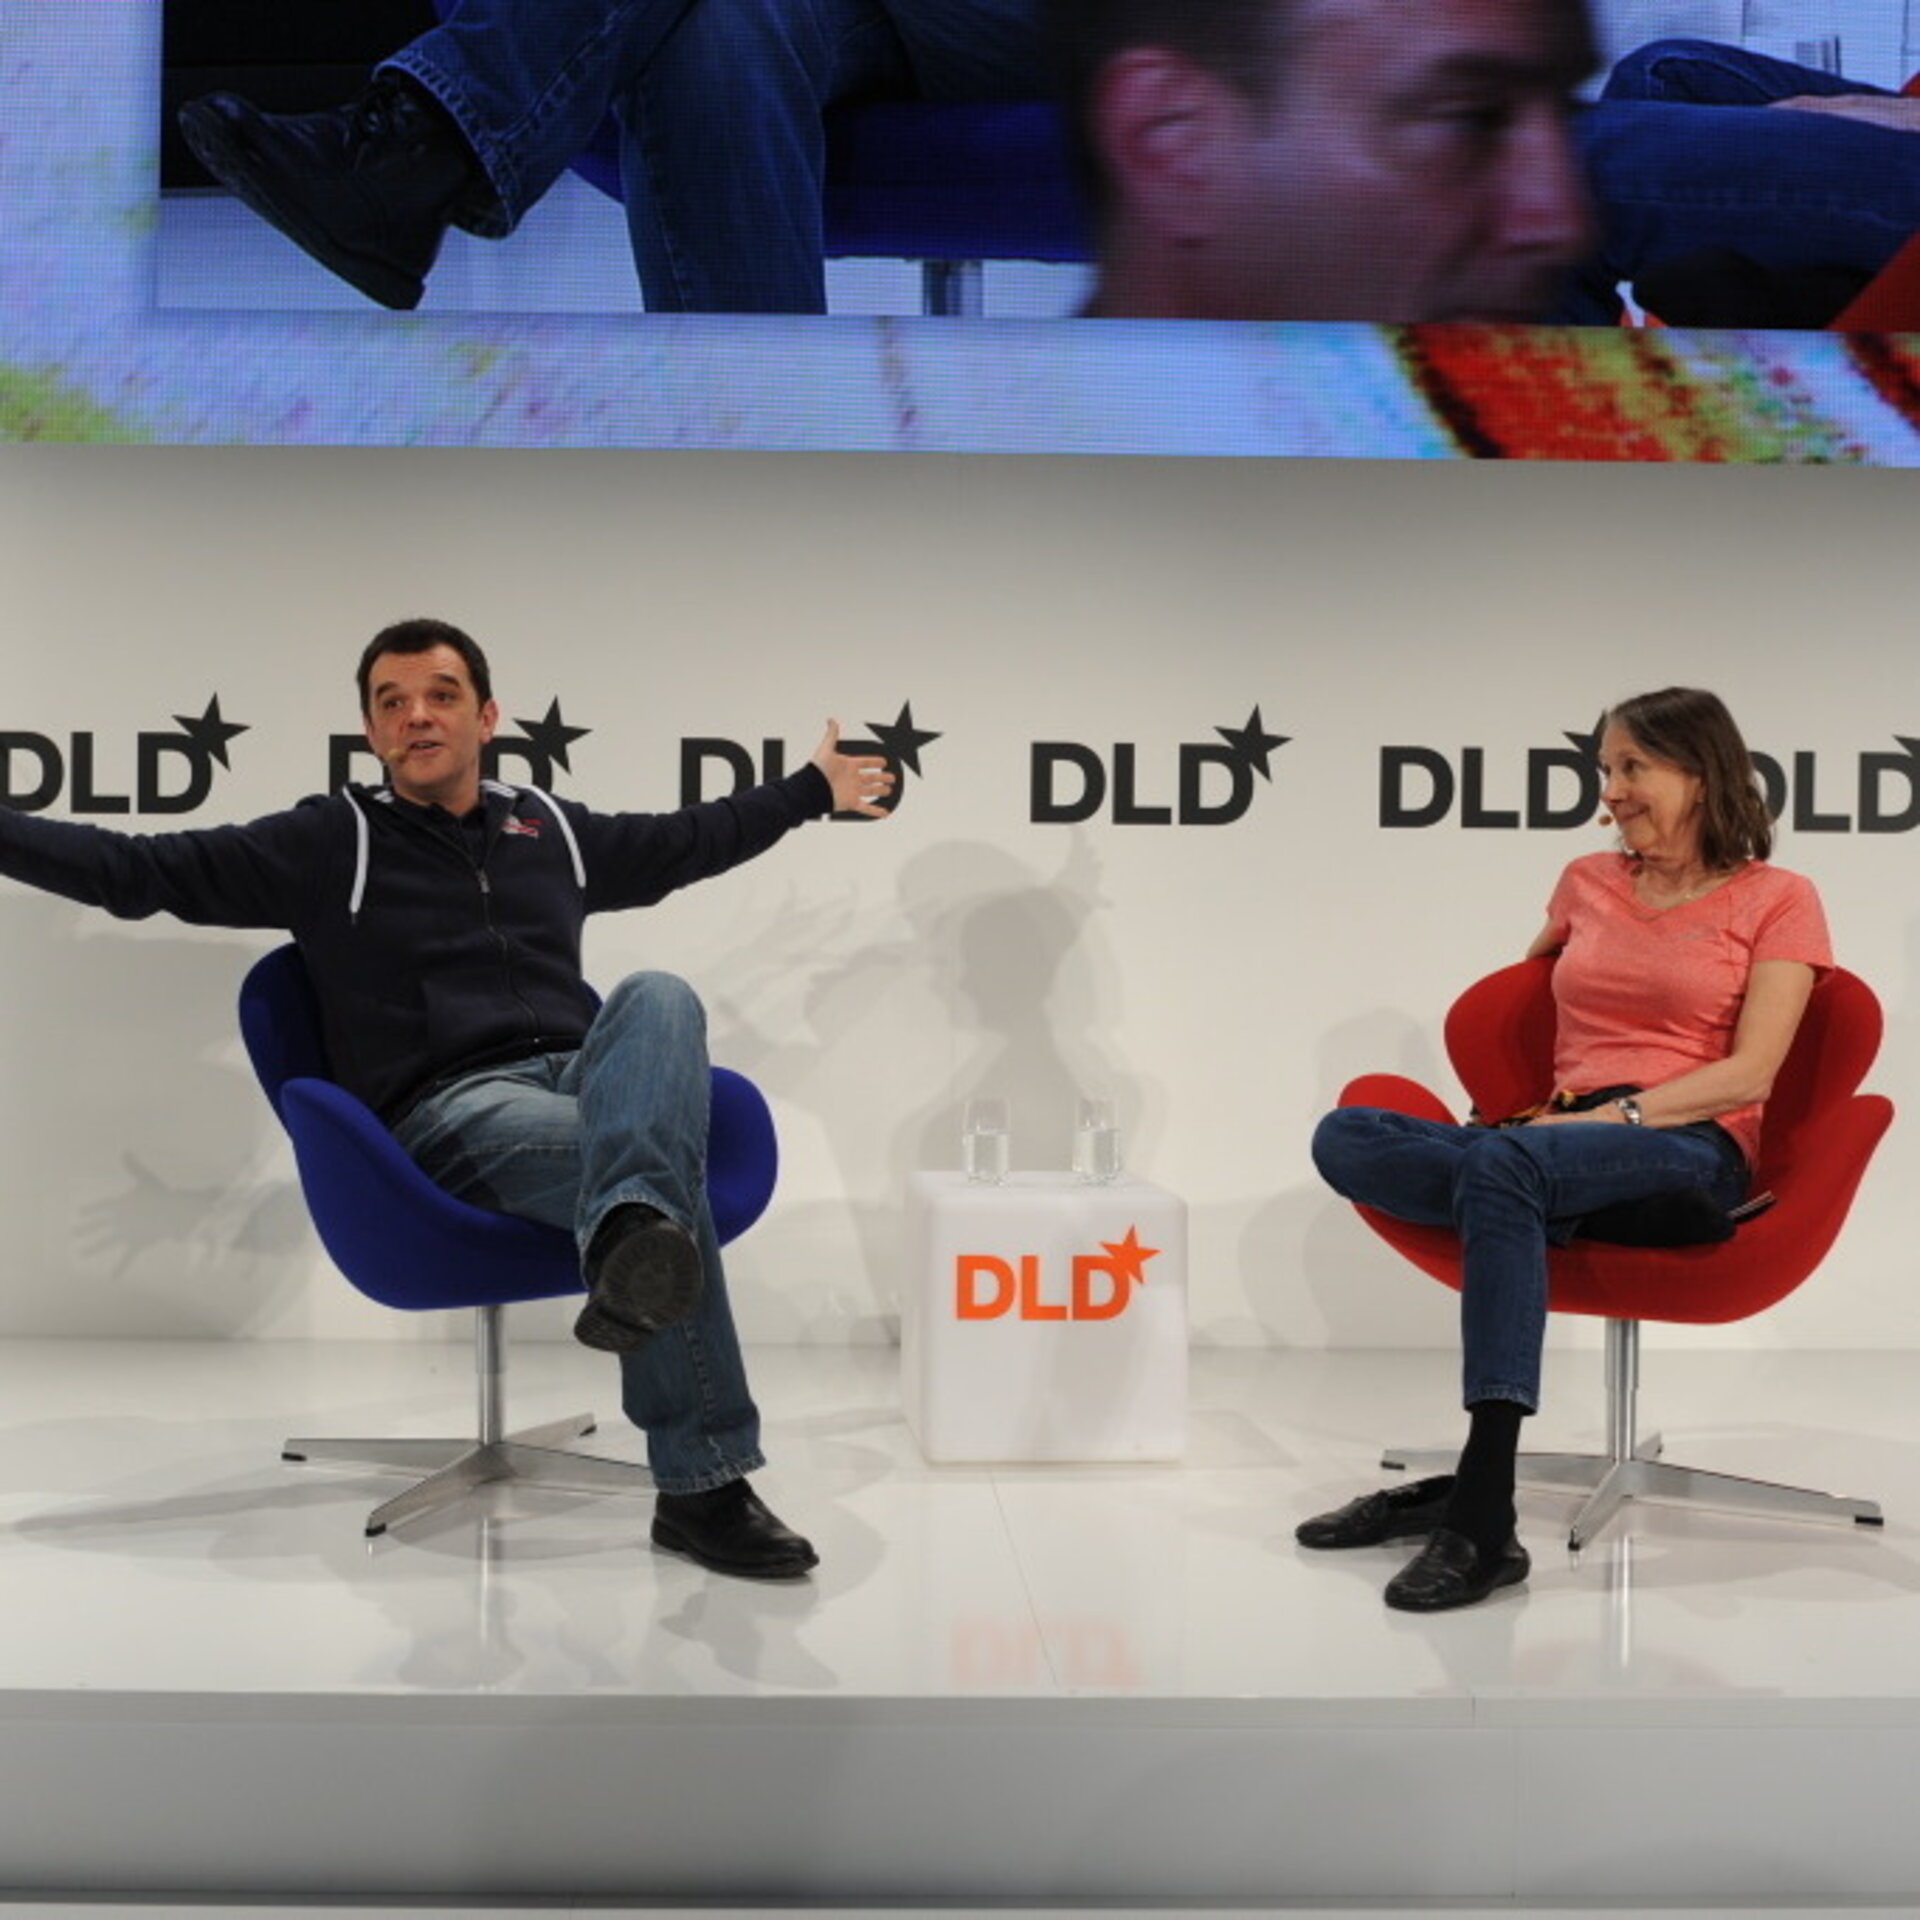 Andrea Accomazzo (ESA) and Esther Dyson at the DLD Conference 2015 in Munich